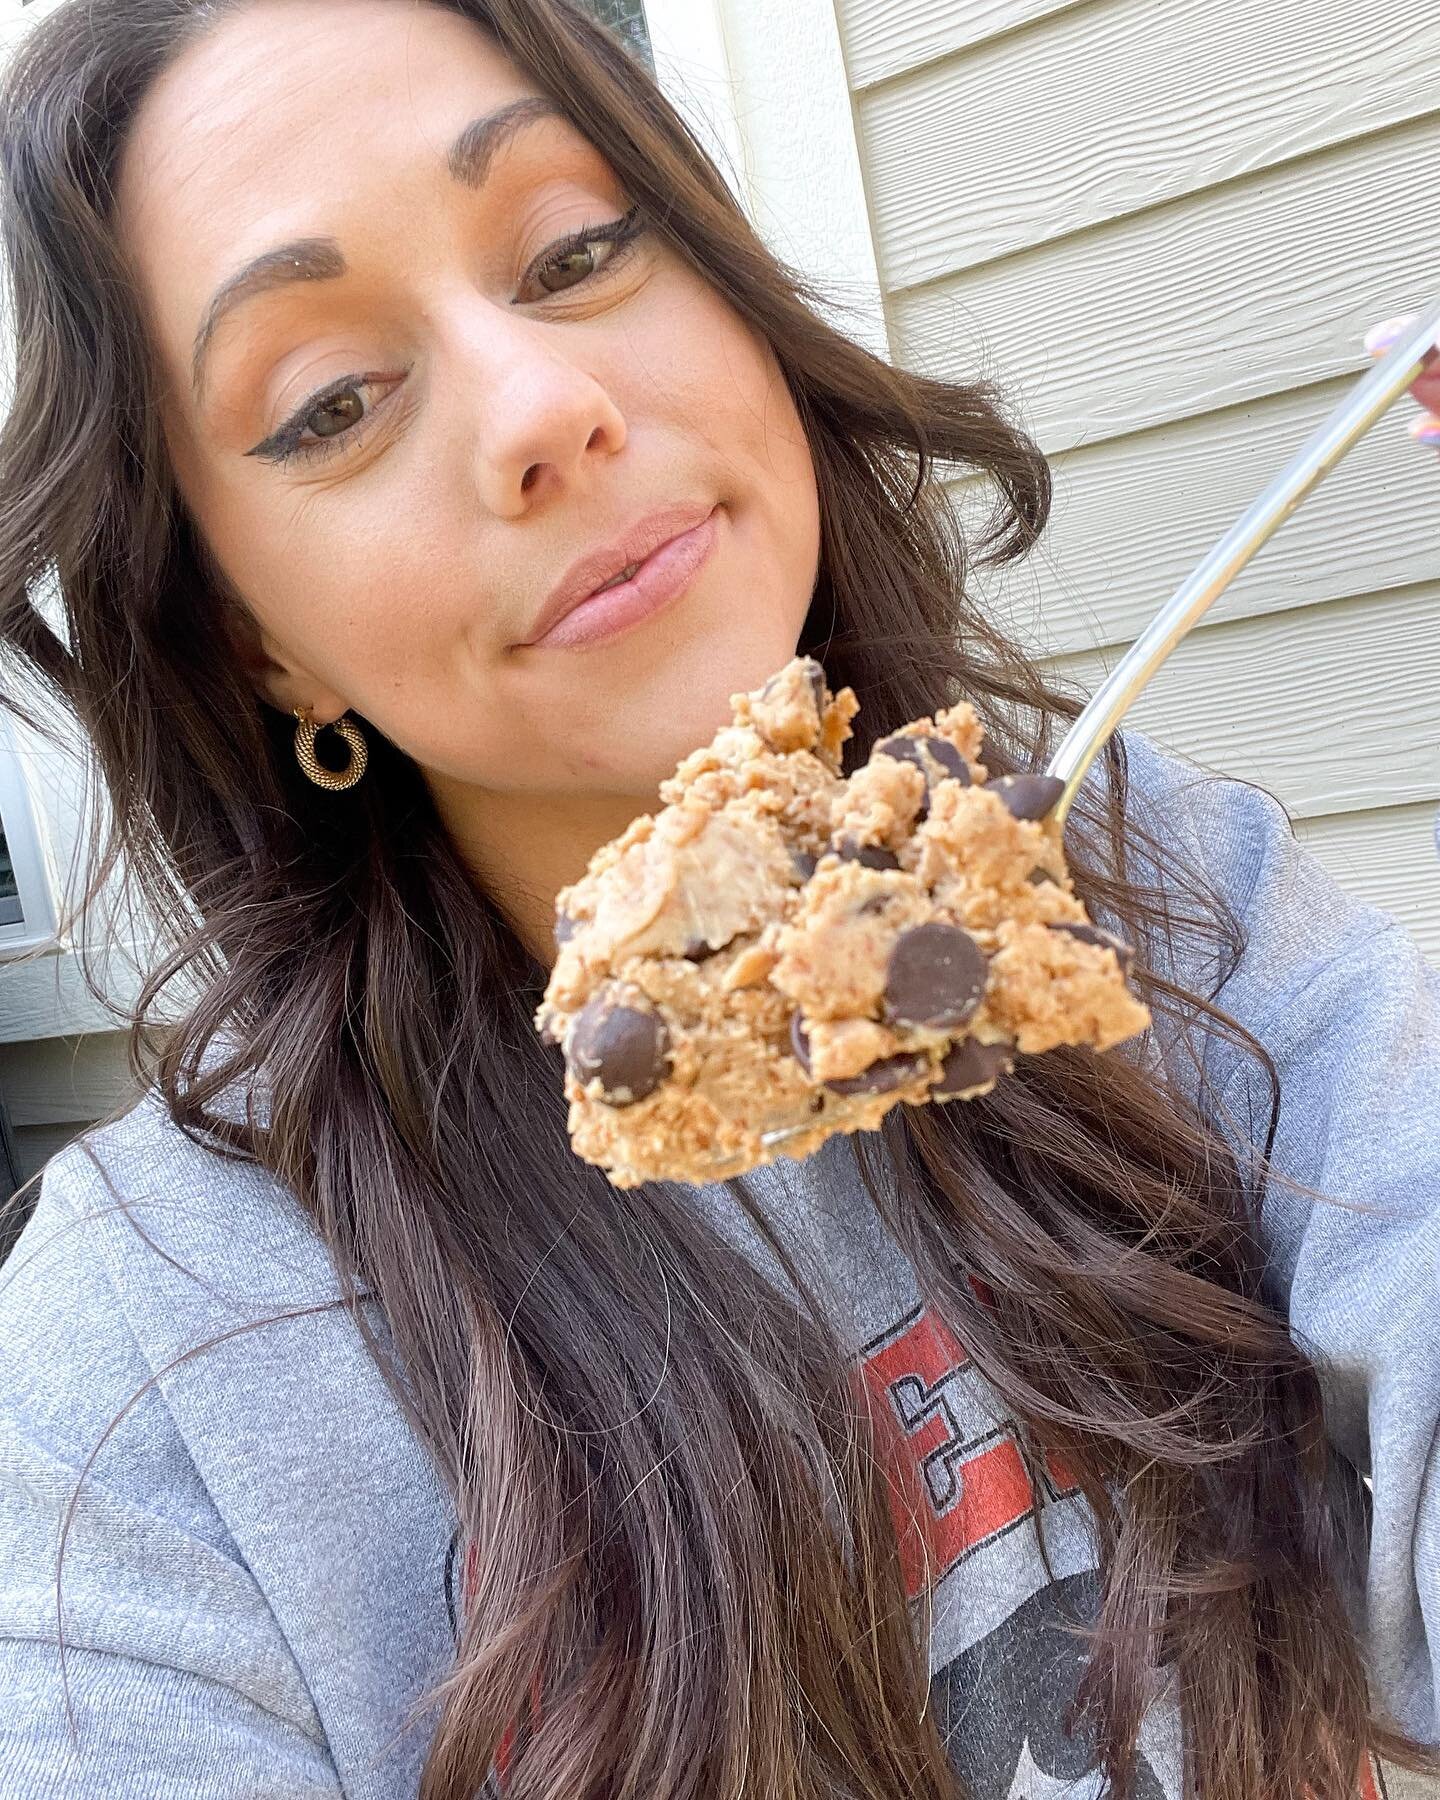 3 Ingredient ✨HIGH PROTEIN✨ Cookie Dough

feat. @legion (aka my favorite protein powder ever)

&gt;&gt;&gt; Swipe For Recipe Video &gt;&gt;&gt;

Ingredients:
- 15g (2Tbs) @enjoylifefoods chocolate chips
- 1/2 scoop vanilla protein of choice (I&rsquo;